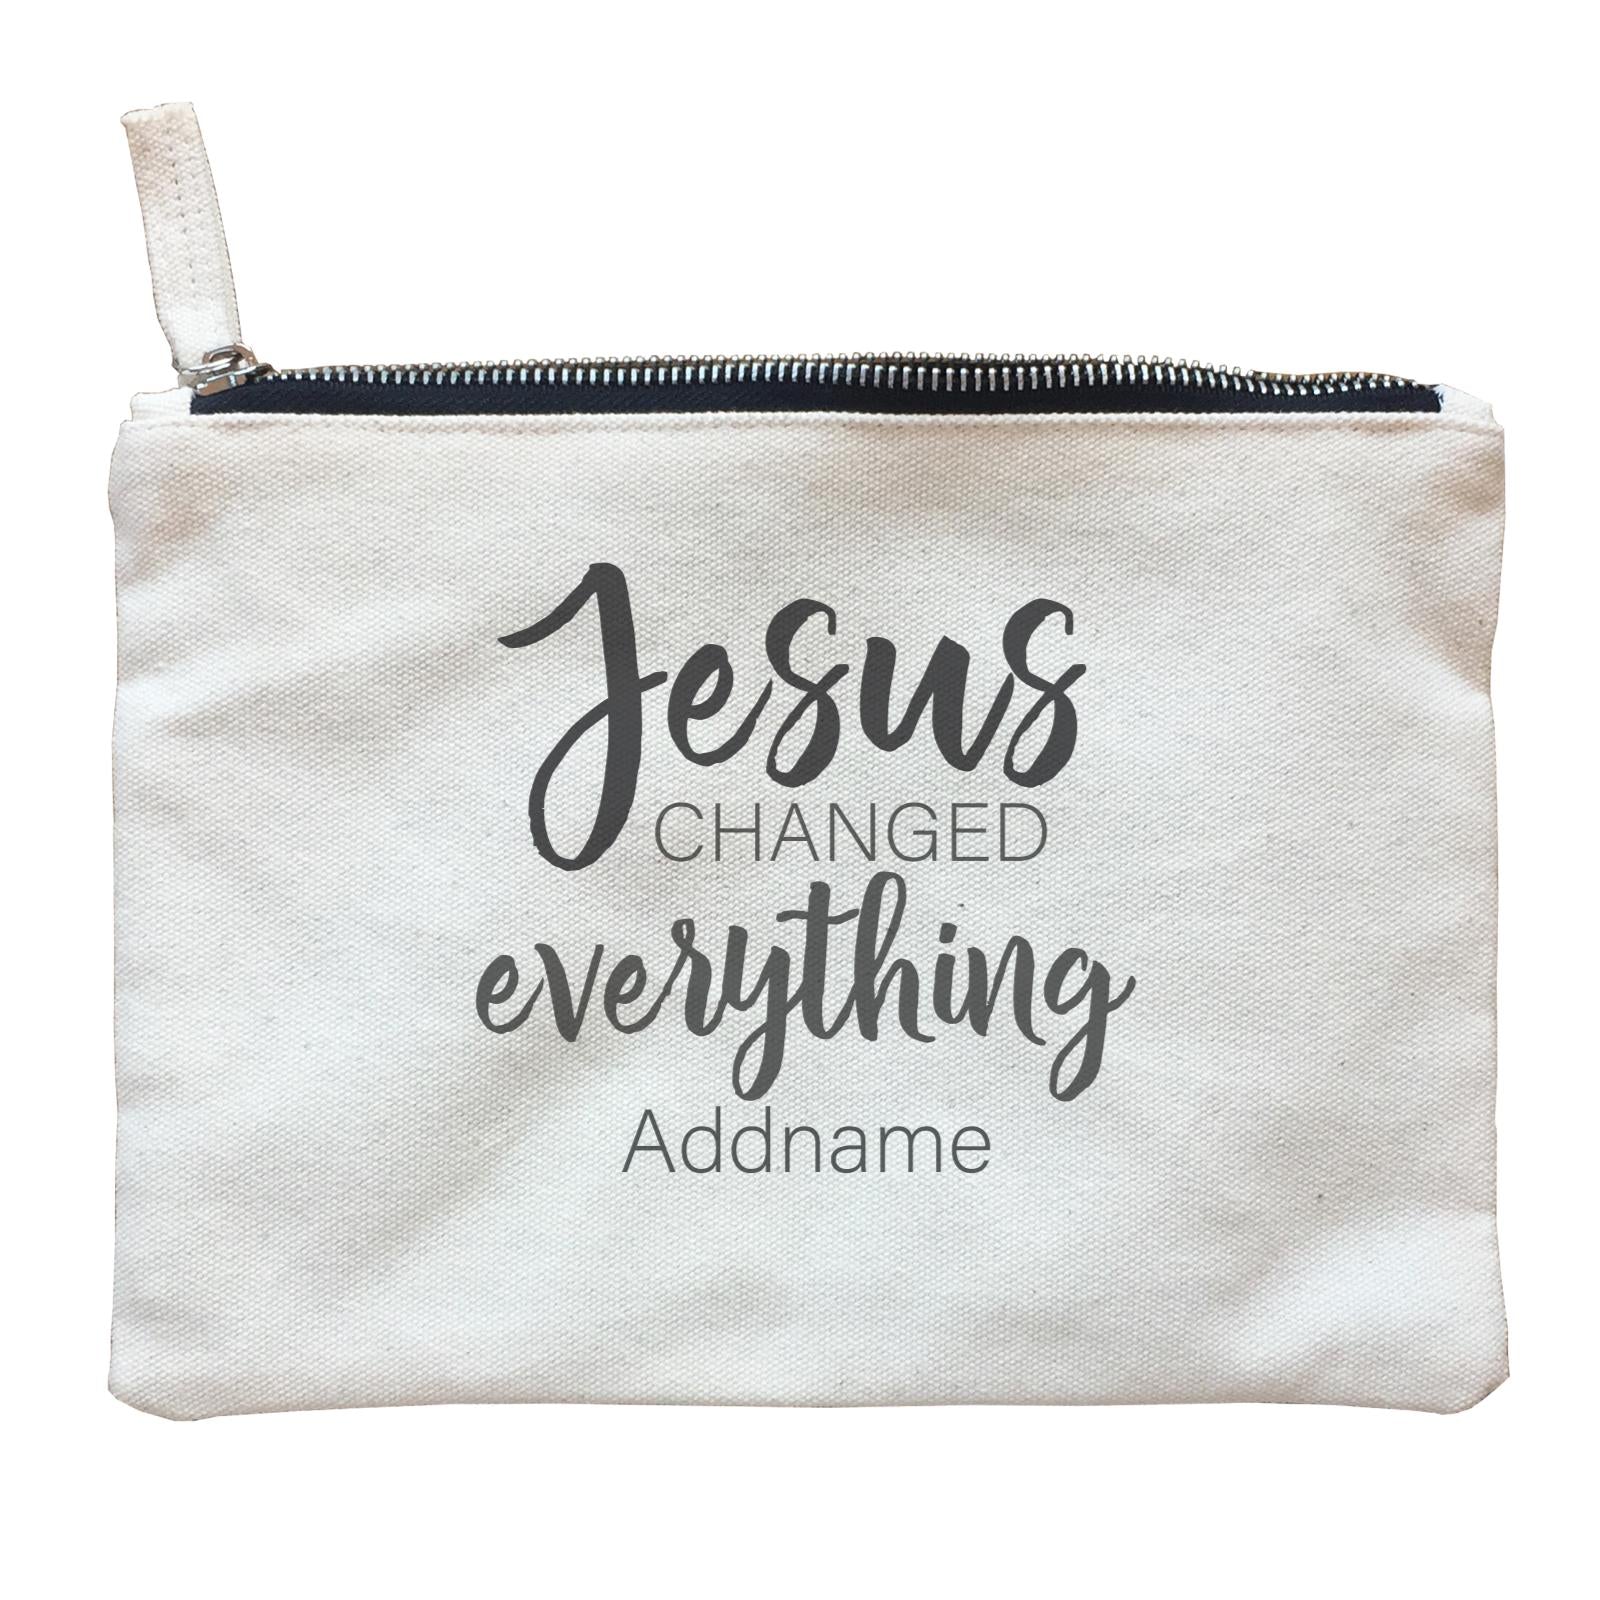 Christian Series Jesus Changed Everthing Addname Zipper Pouch